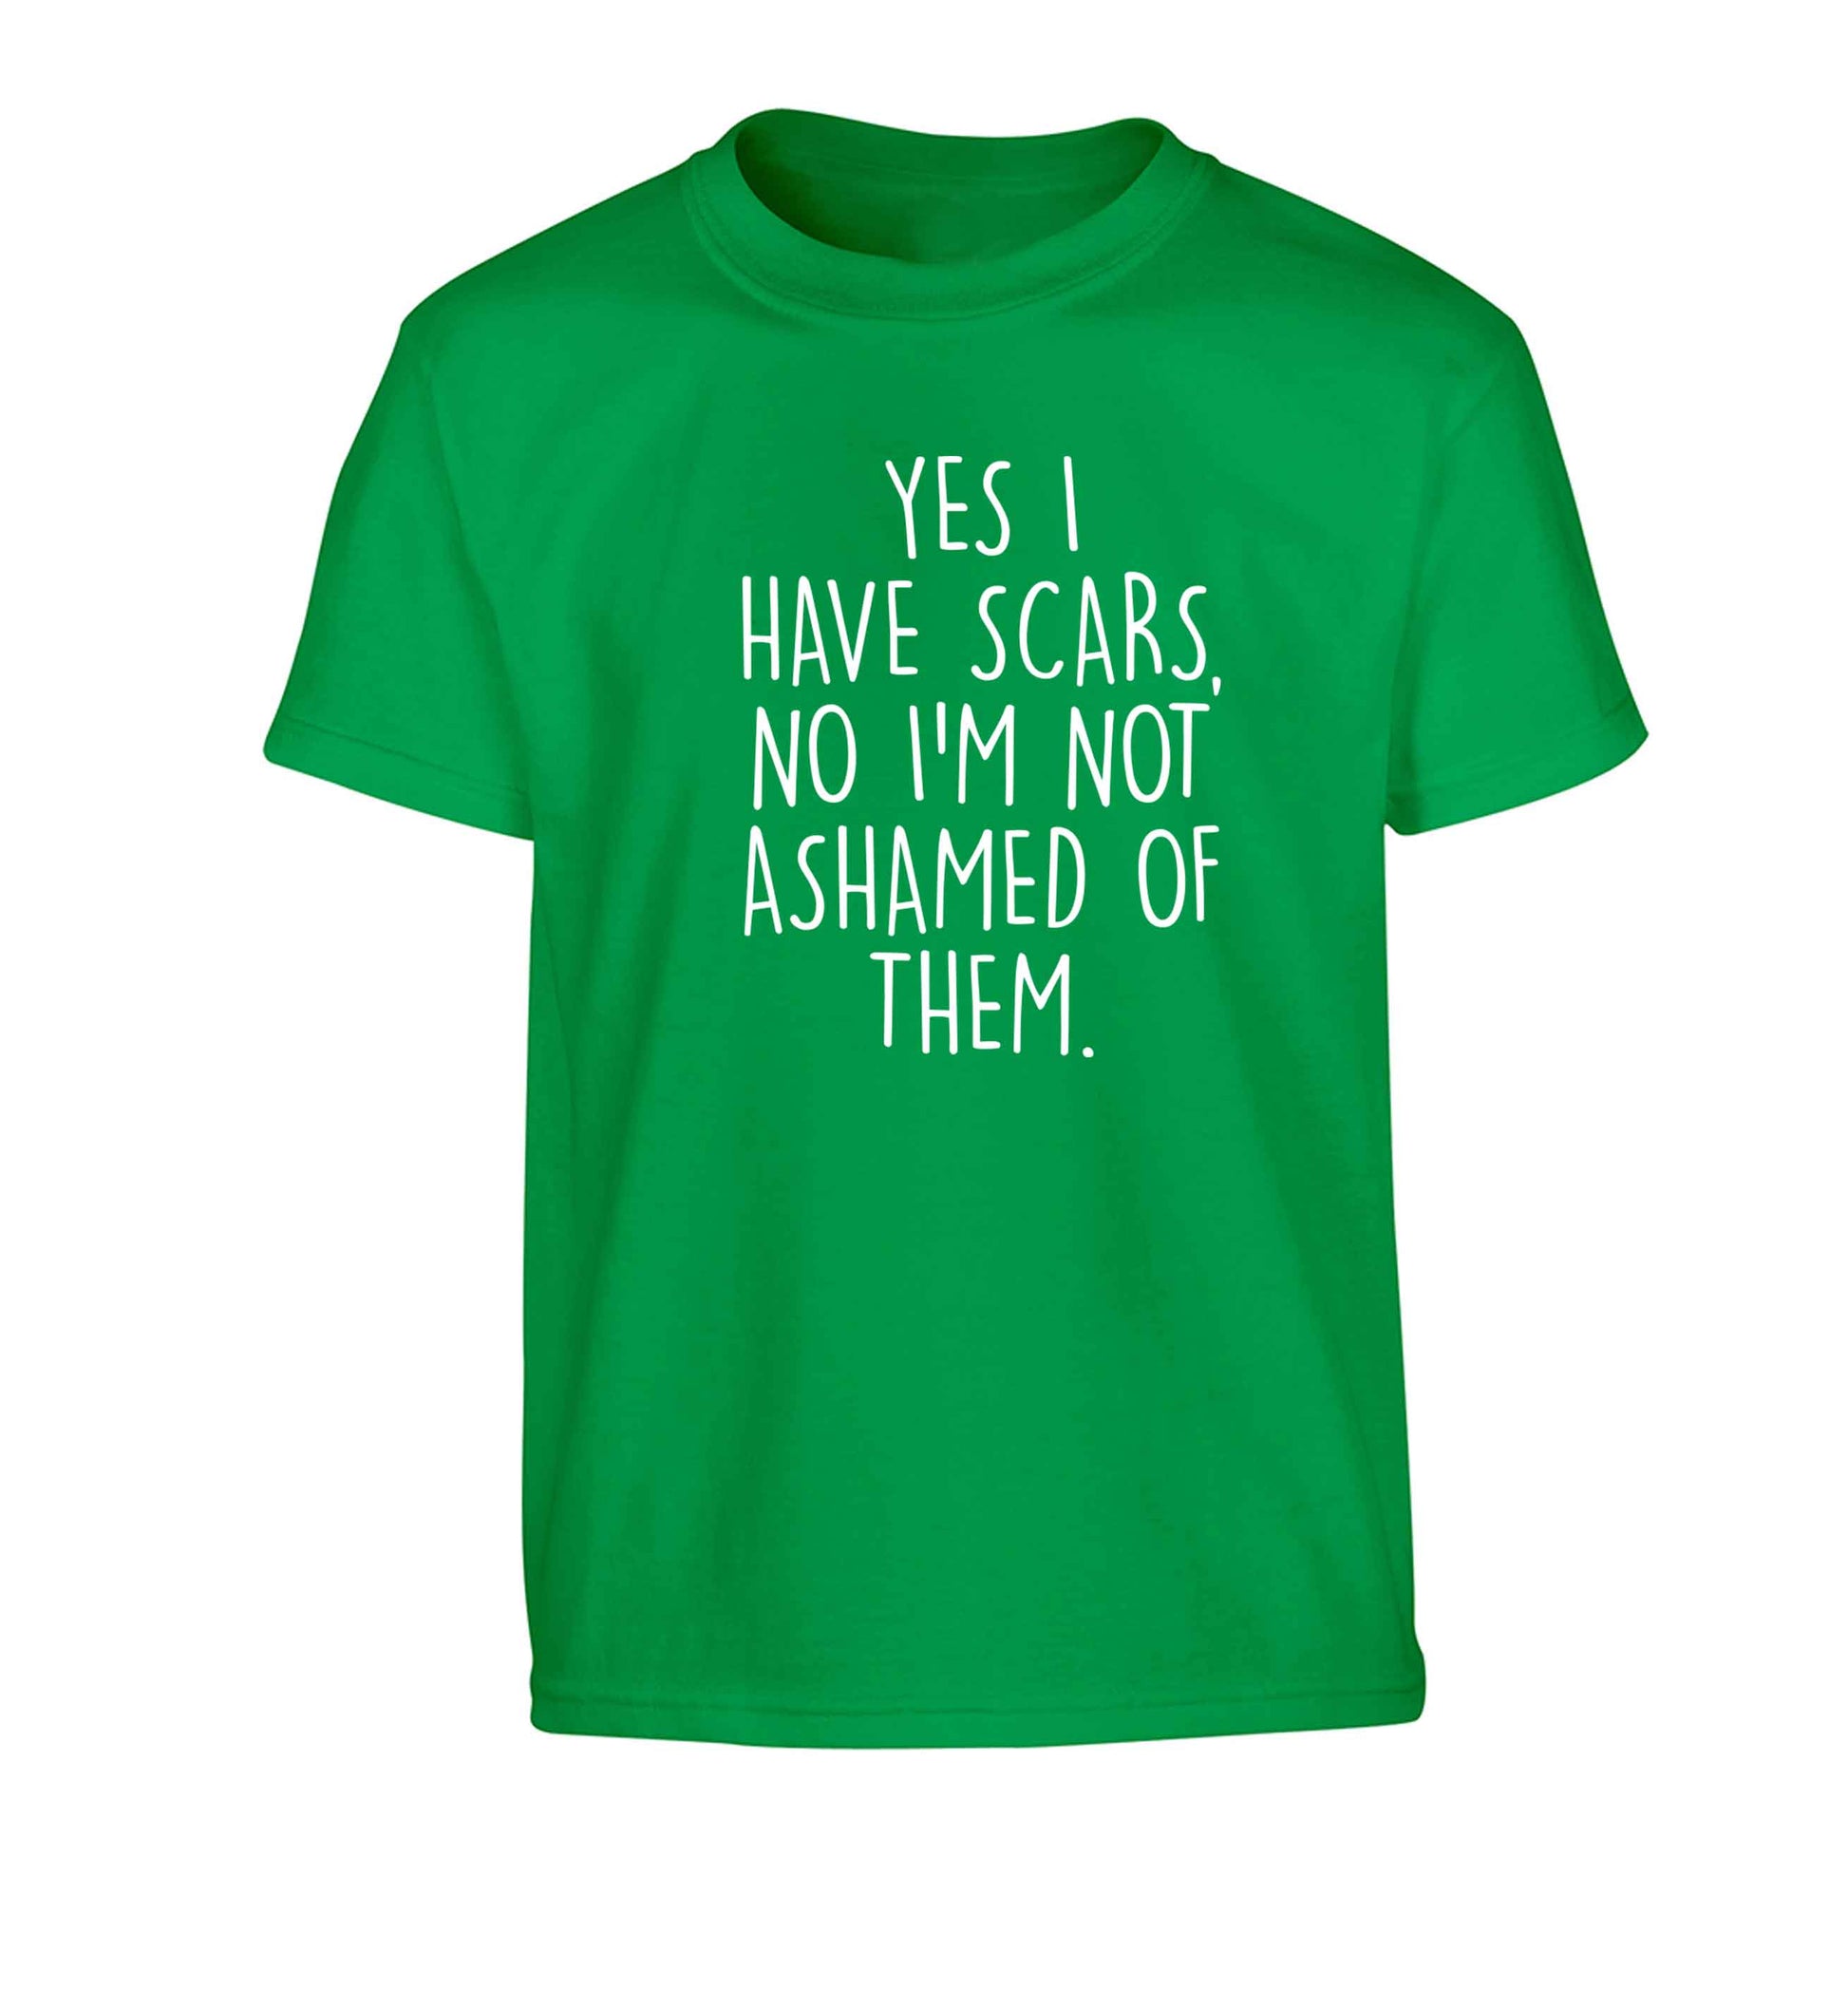 Yes I have scars, no I'm not ashamed of them Children's green Tshirt 12-13 Years